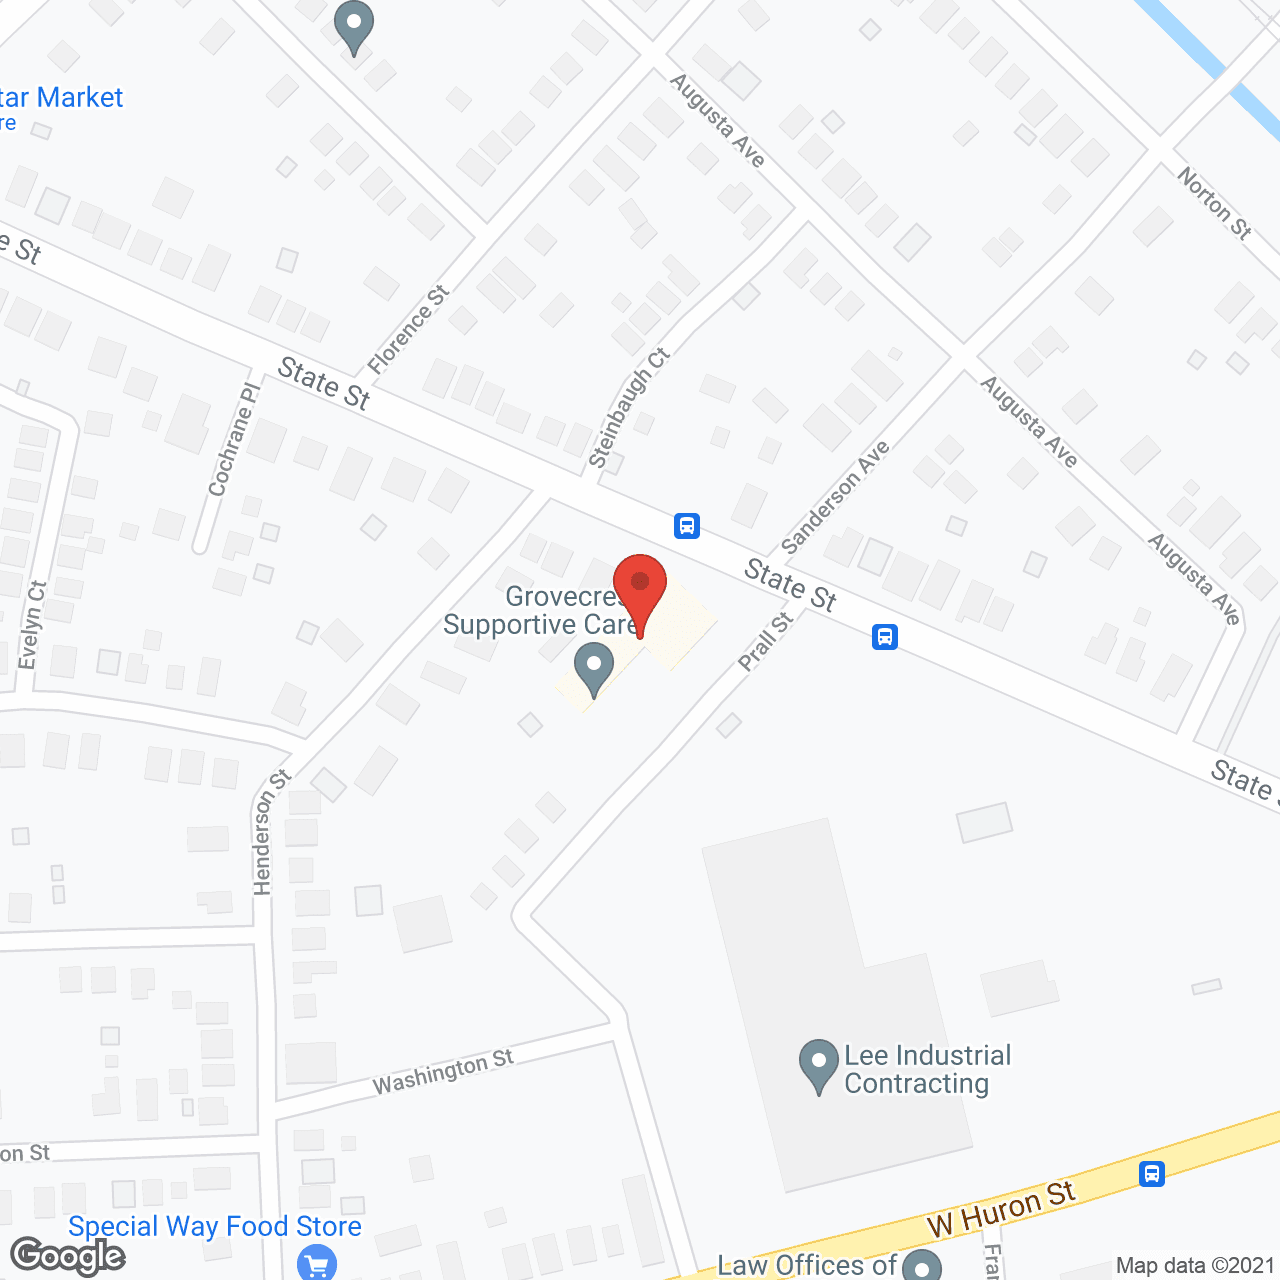 Grovecrest Supportive Care in google map